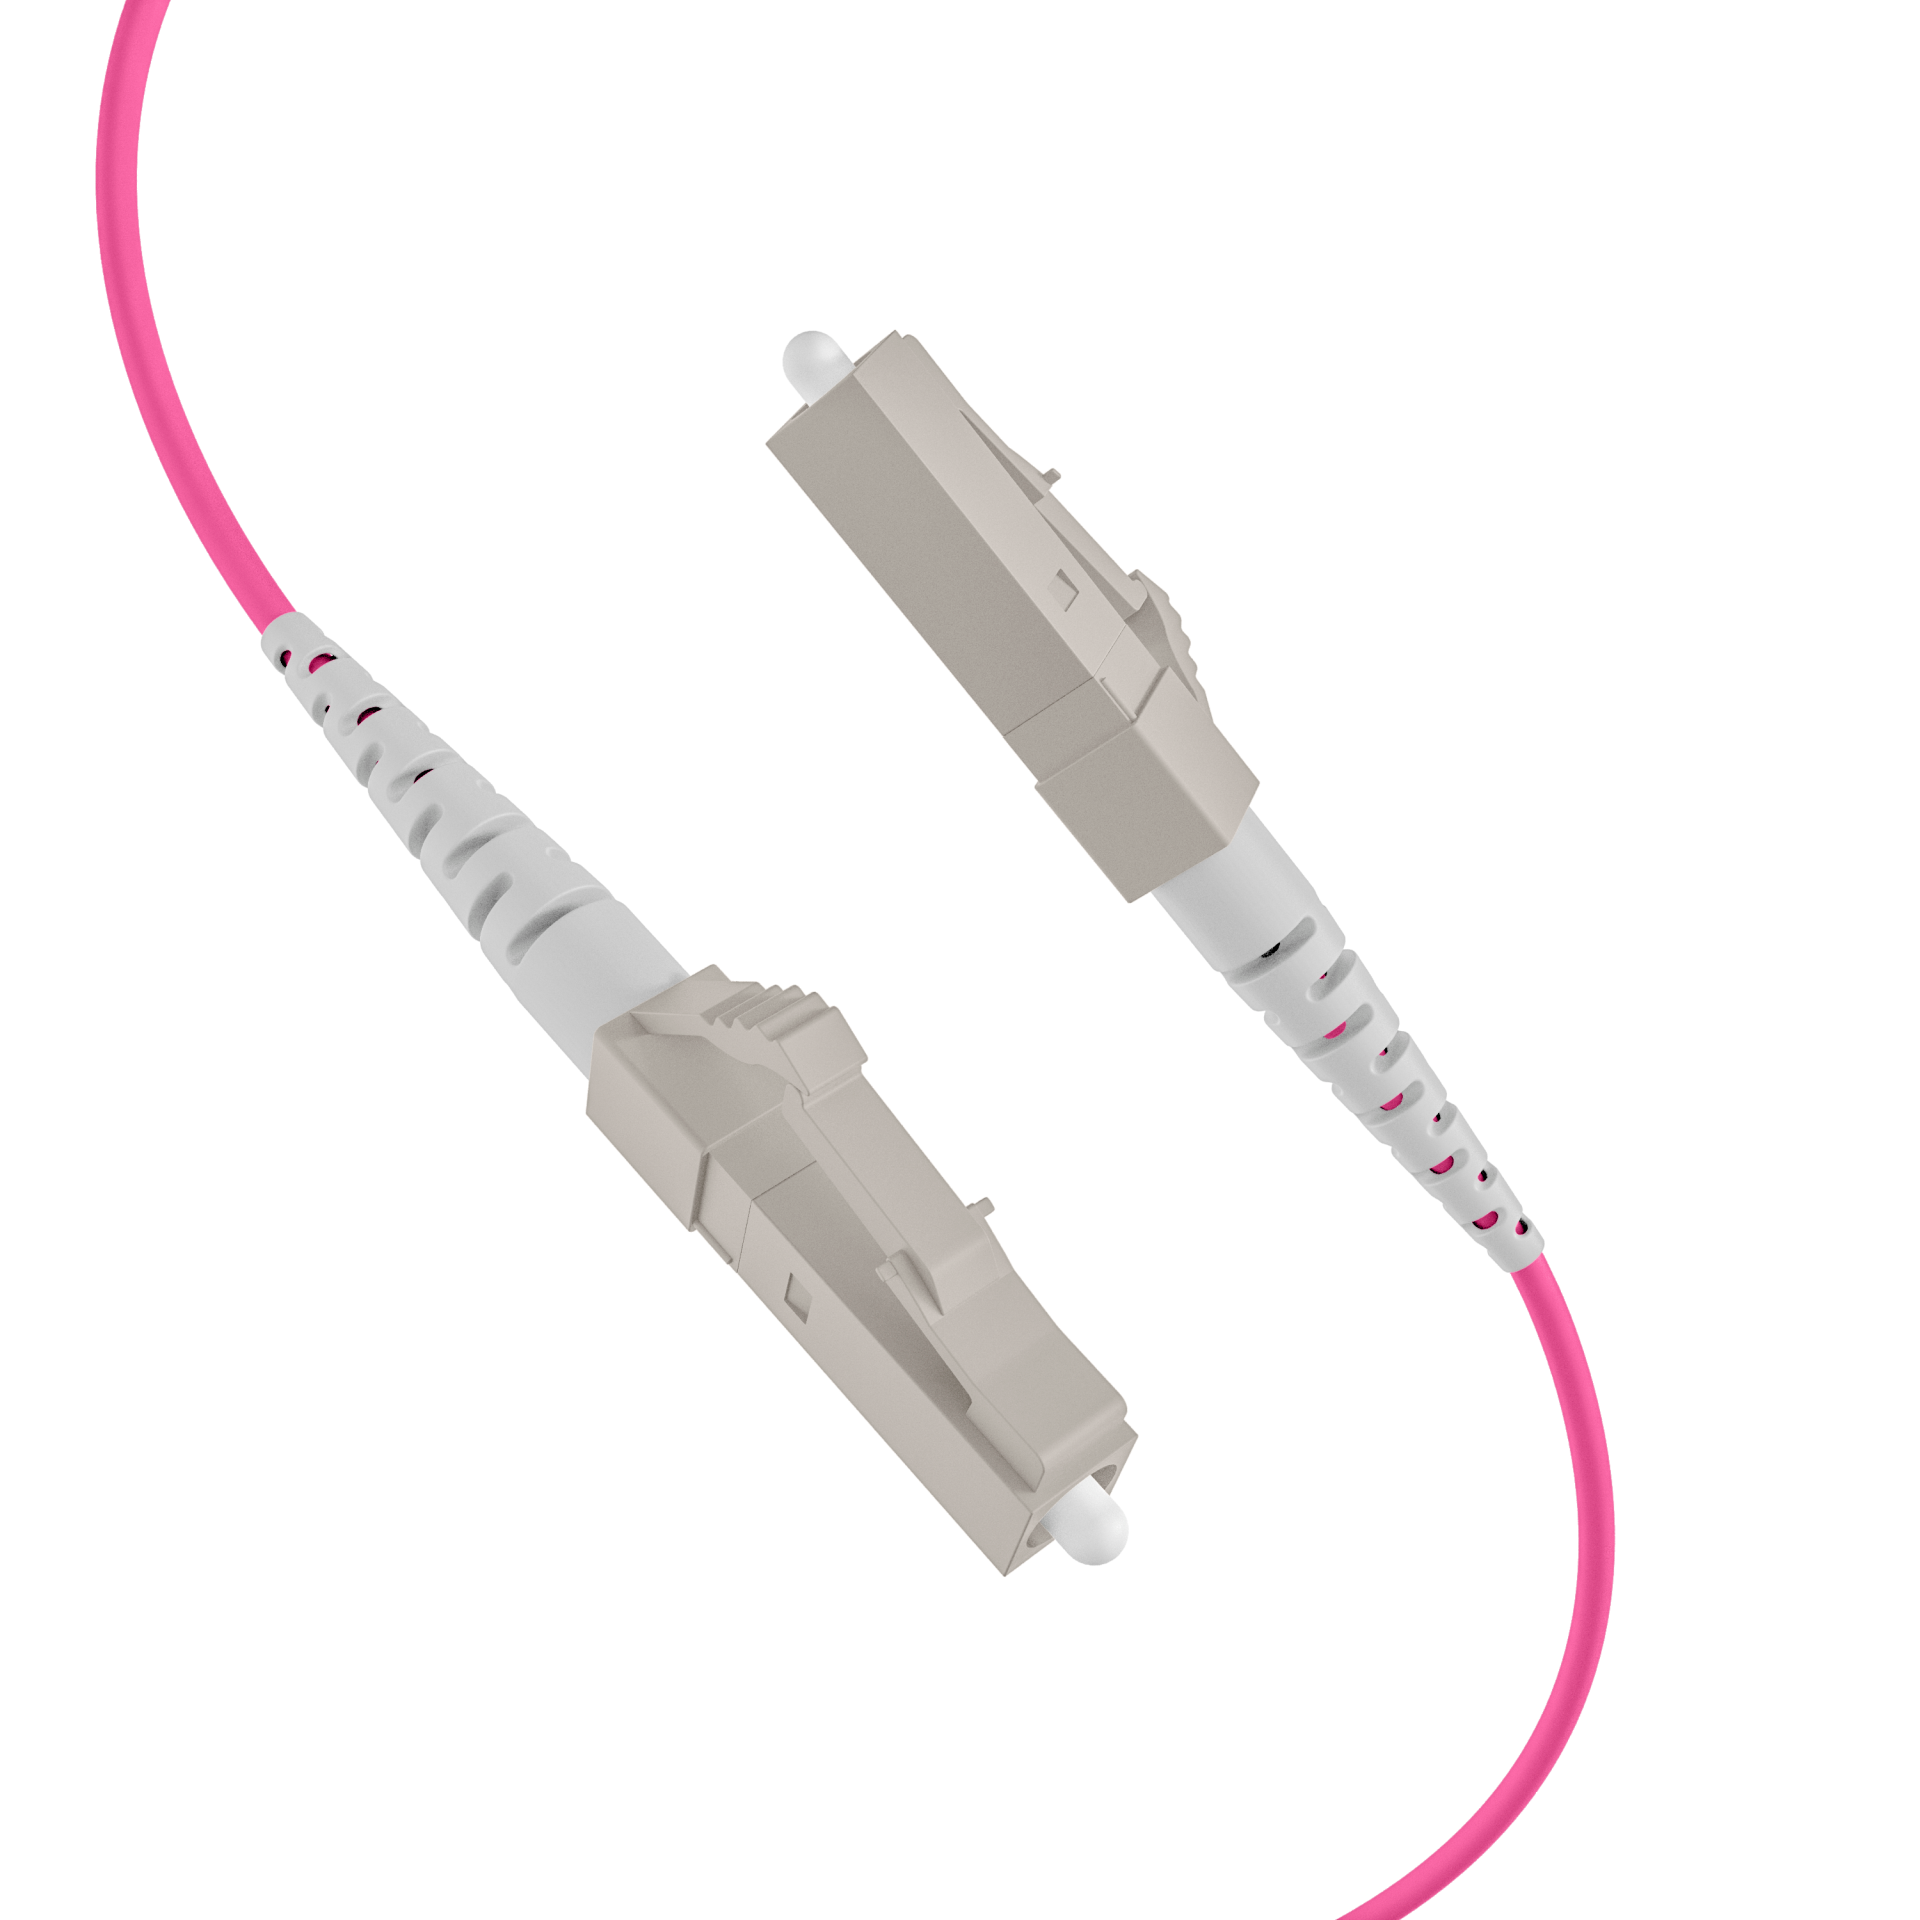 Trunkcable U-DQ(ZN)BH OM4 12G (1x12) LC-LC,180m Dca LSZH